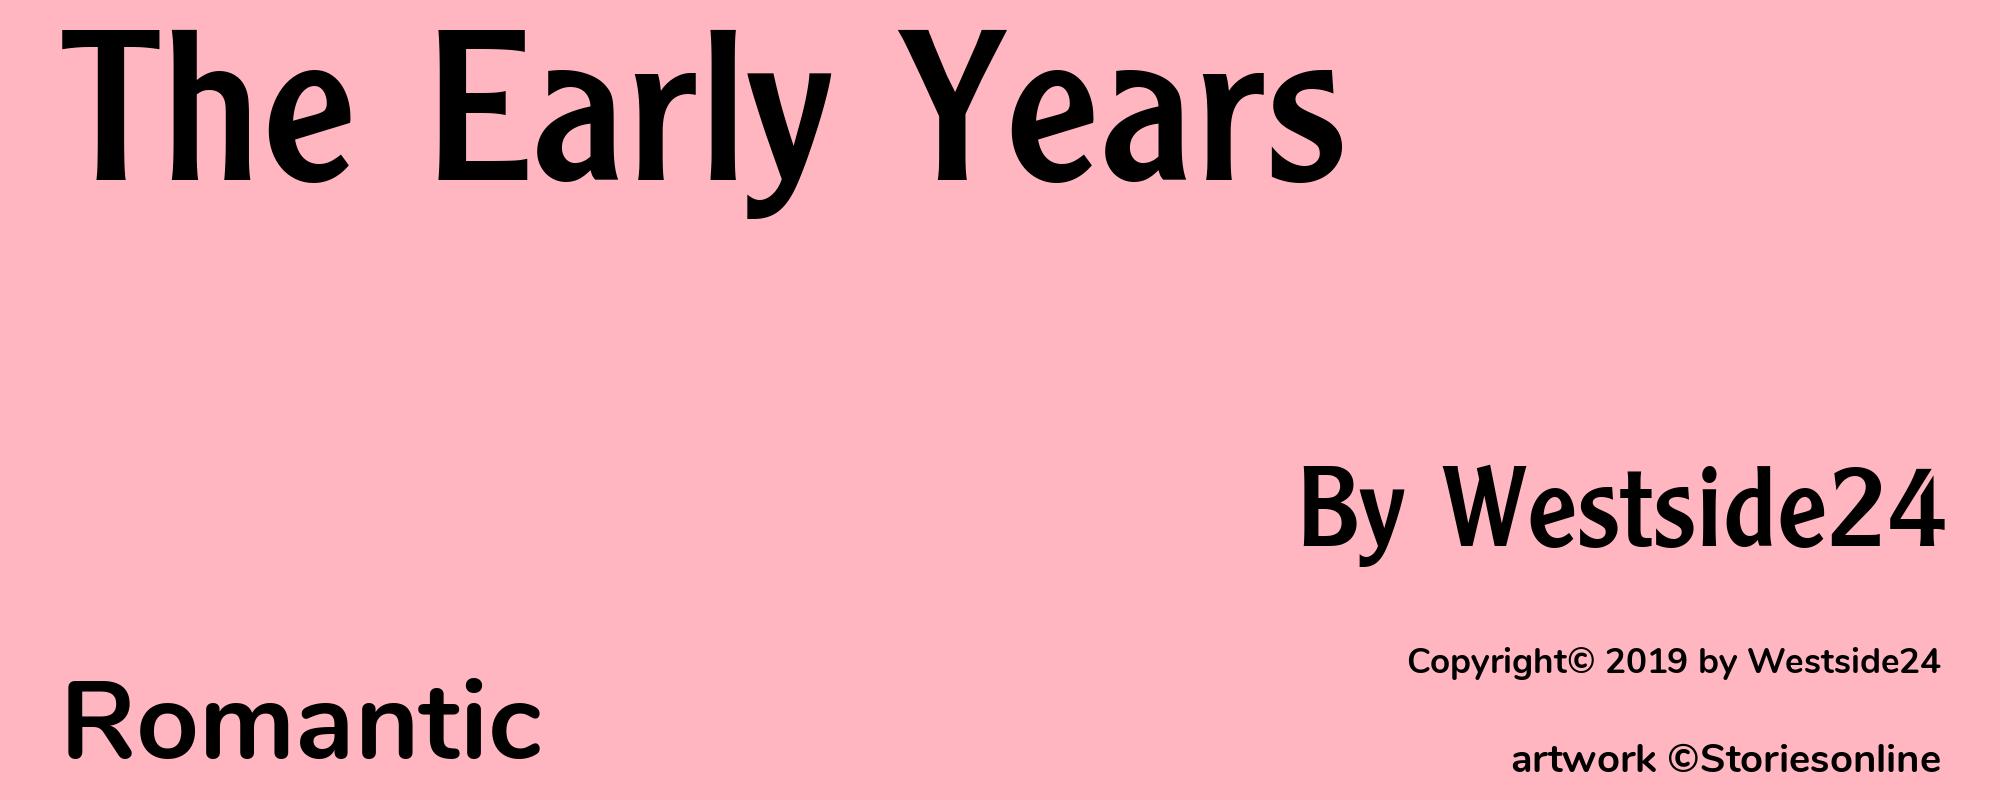 The Early Years - Cover